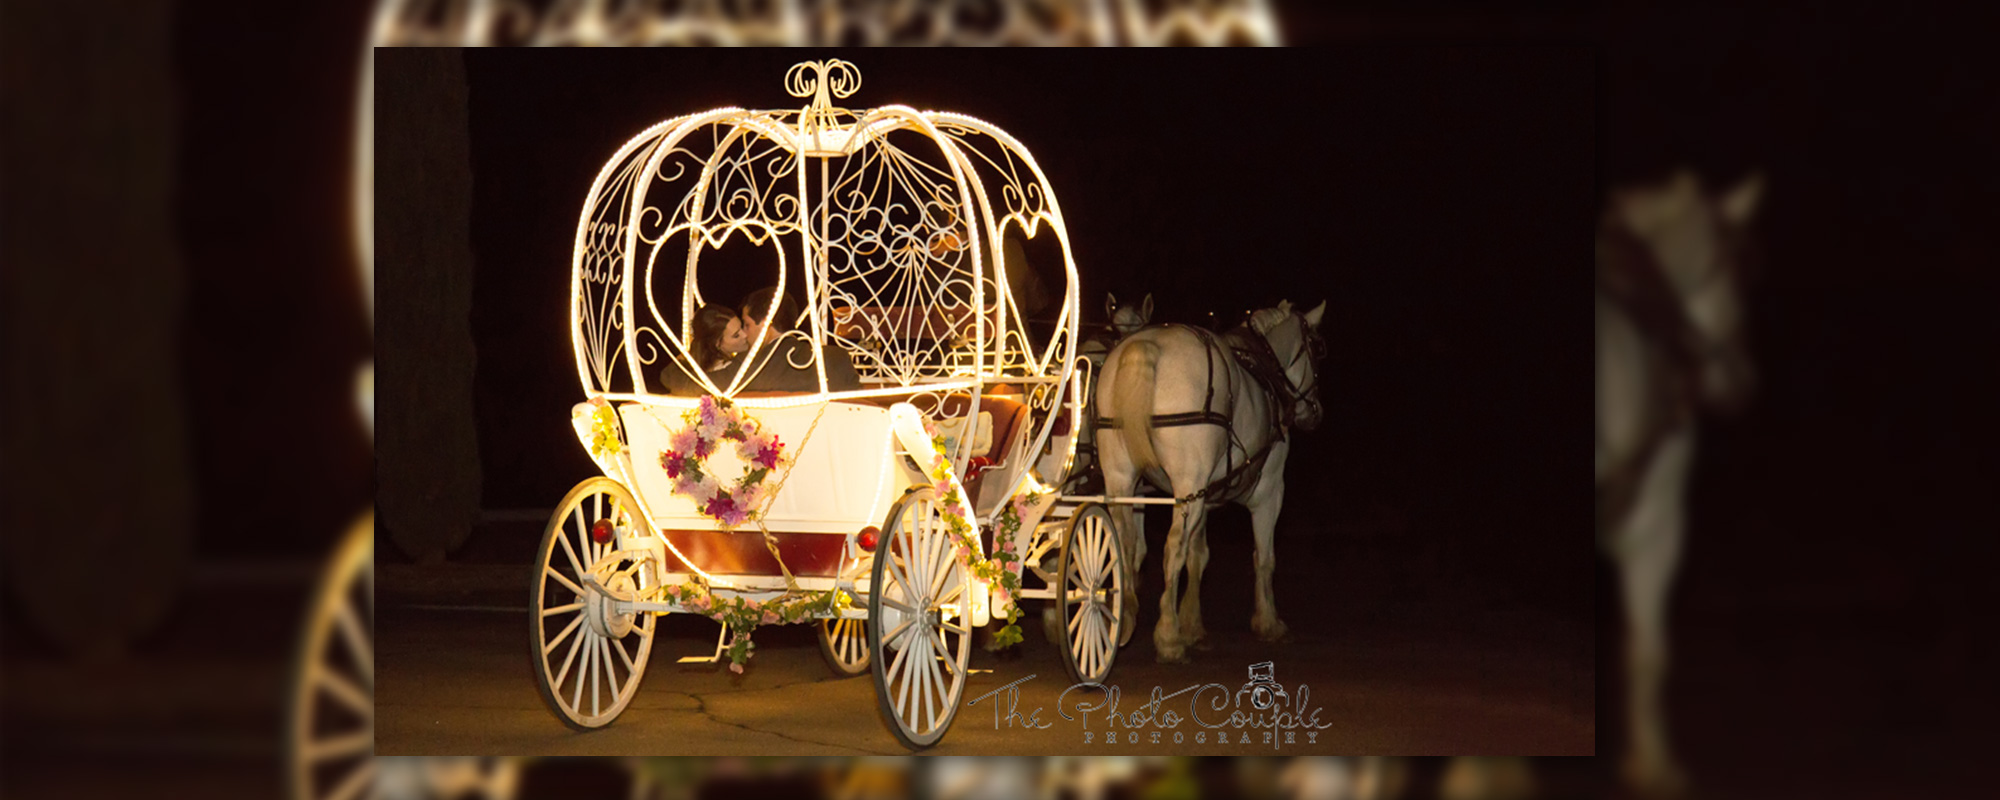 Home - Horse Drawn Carriage Company